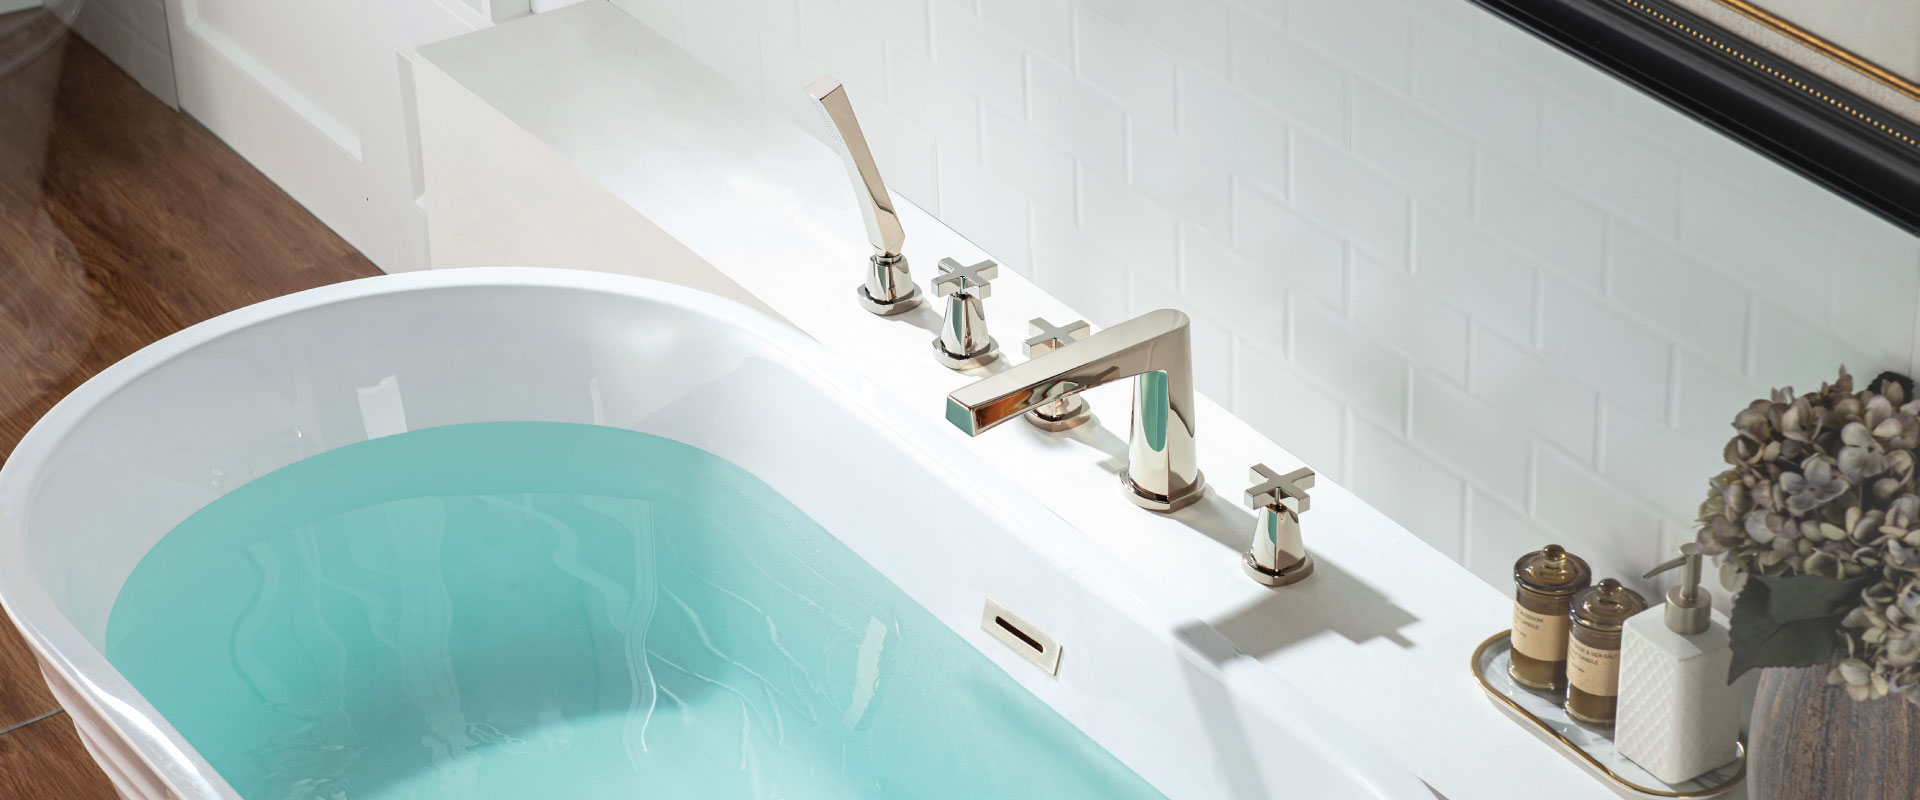 Polished Nickel Bath Tub Faucet With Hand Held